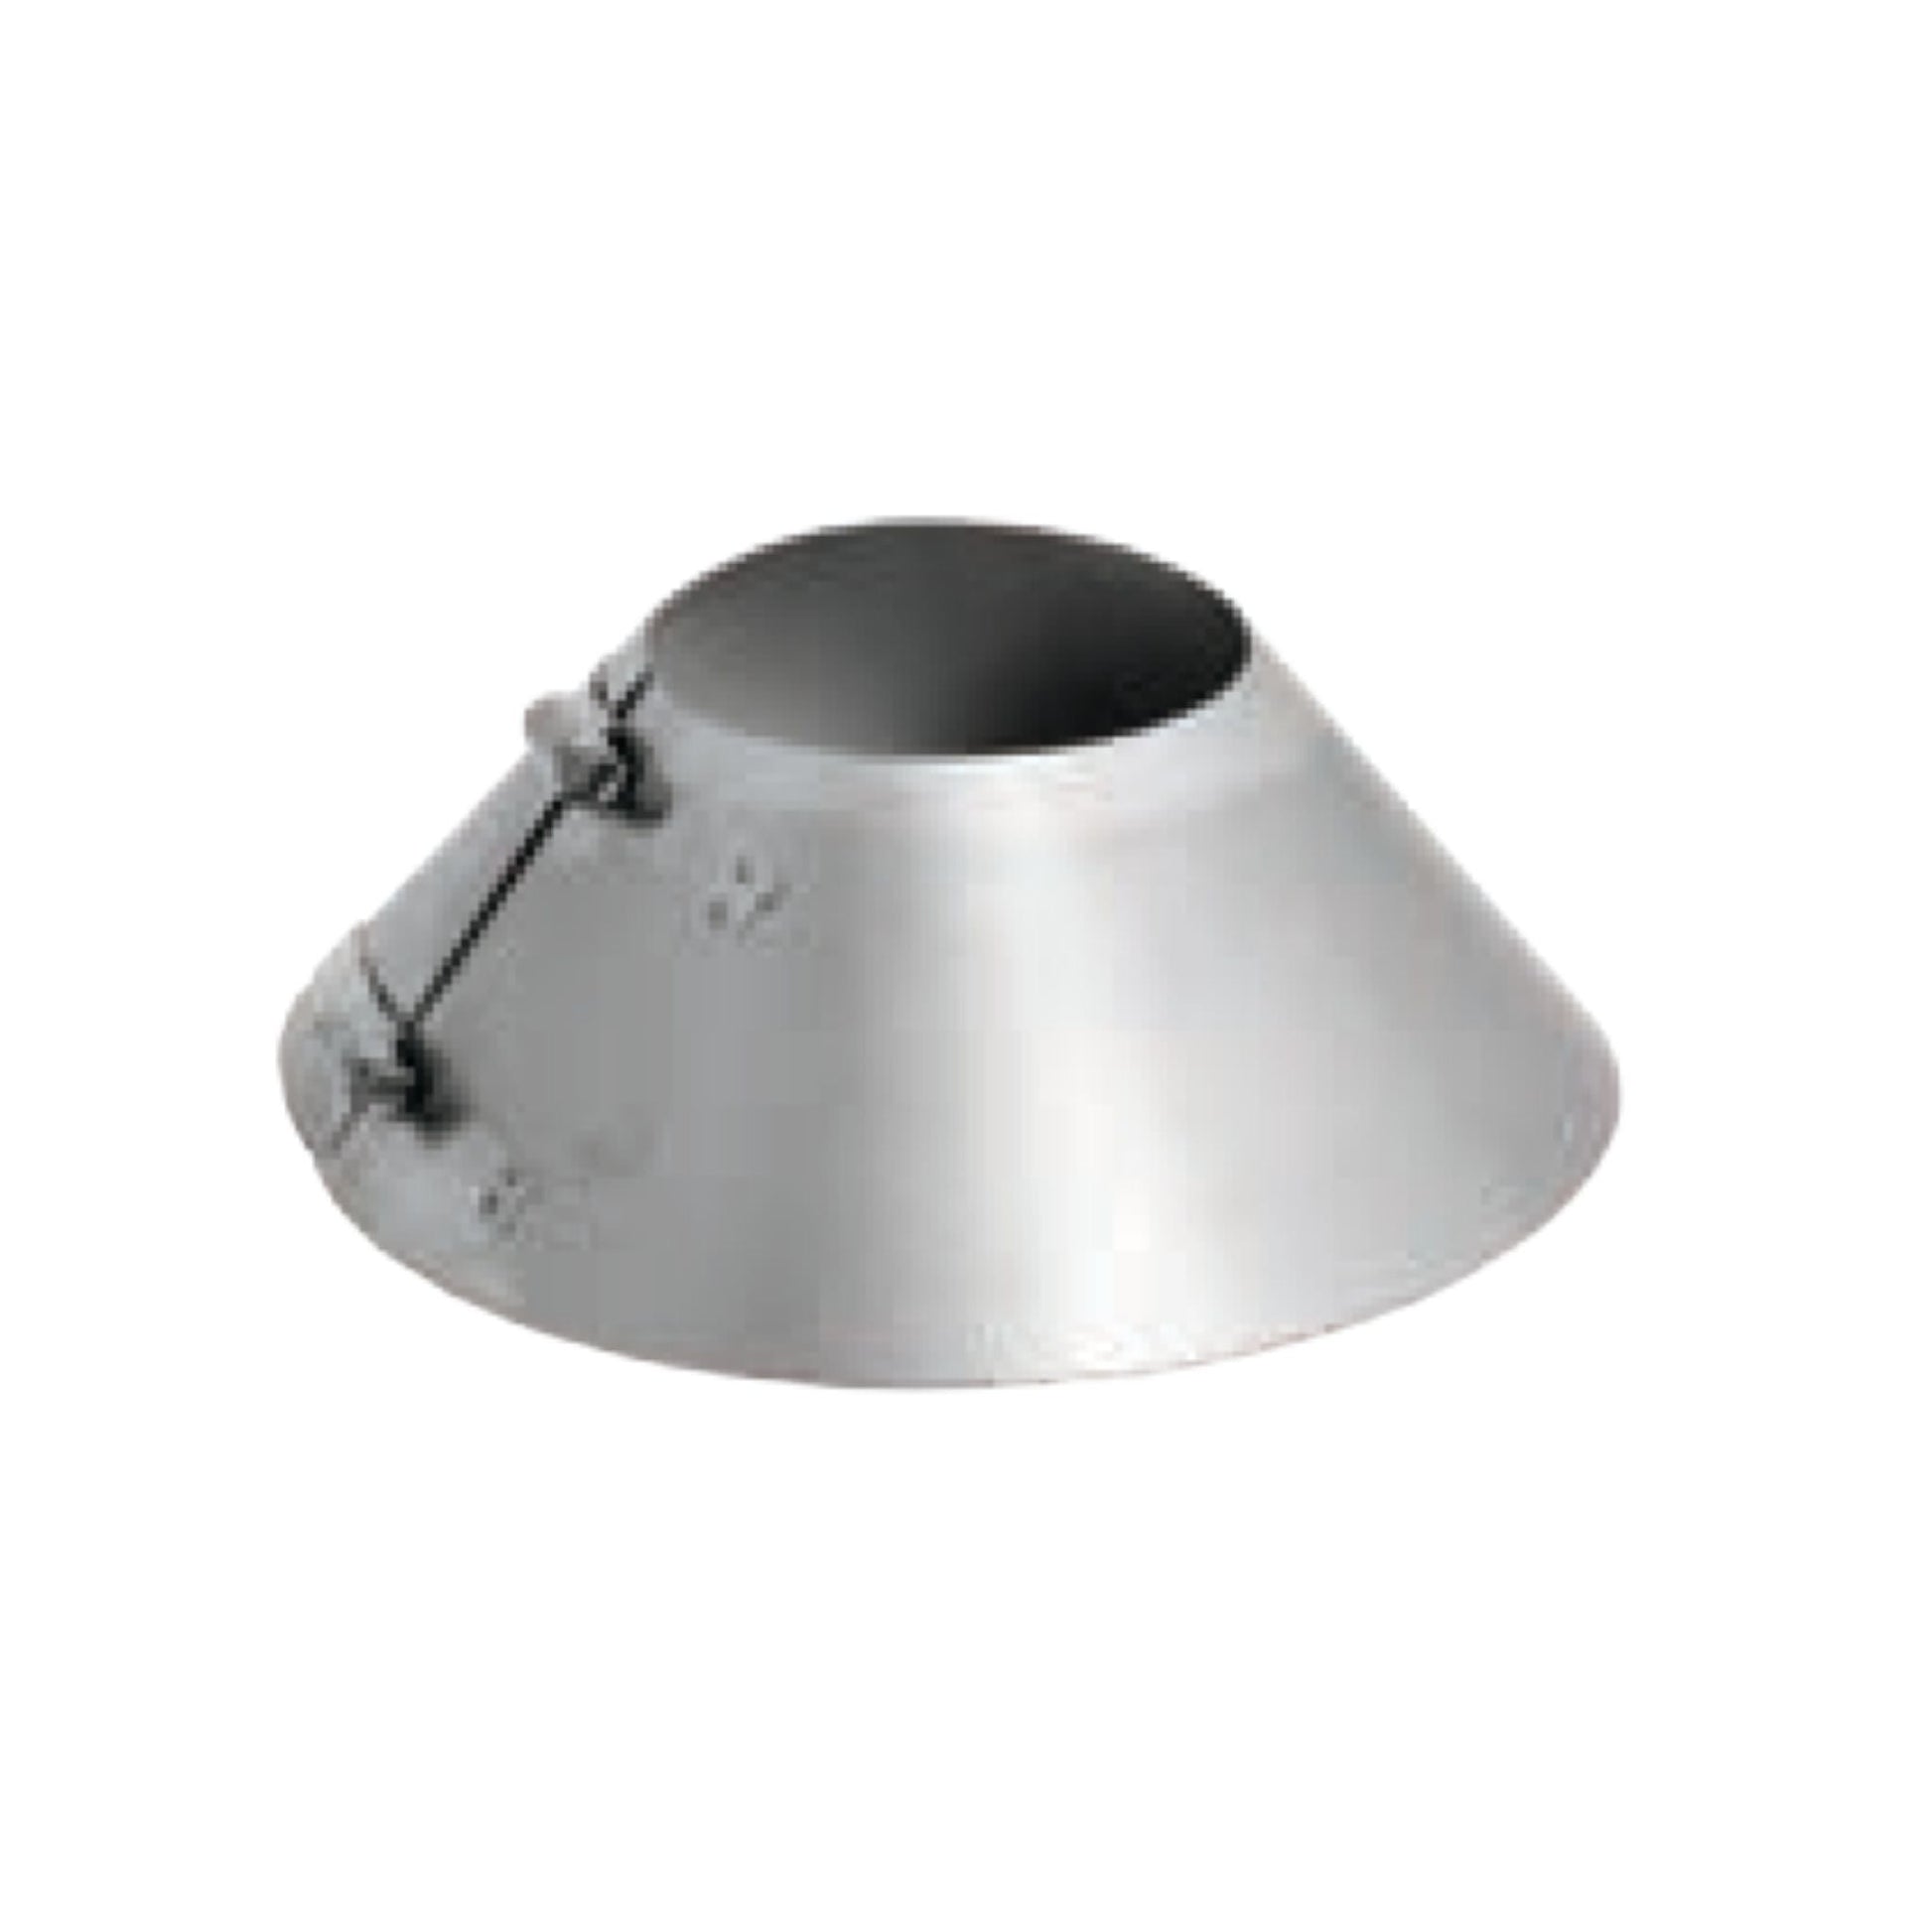 DuraVent FasNSeal 9" 29-4C Stainless Steel Storm Collar